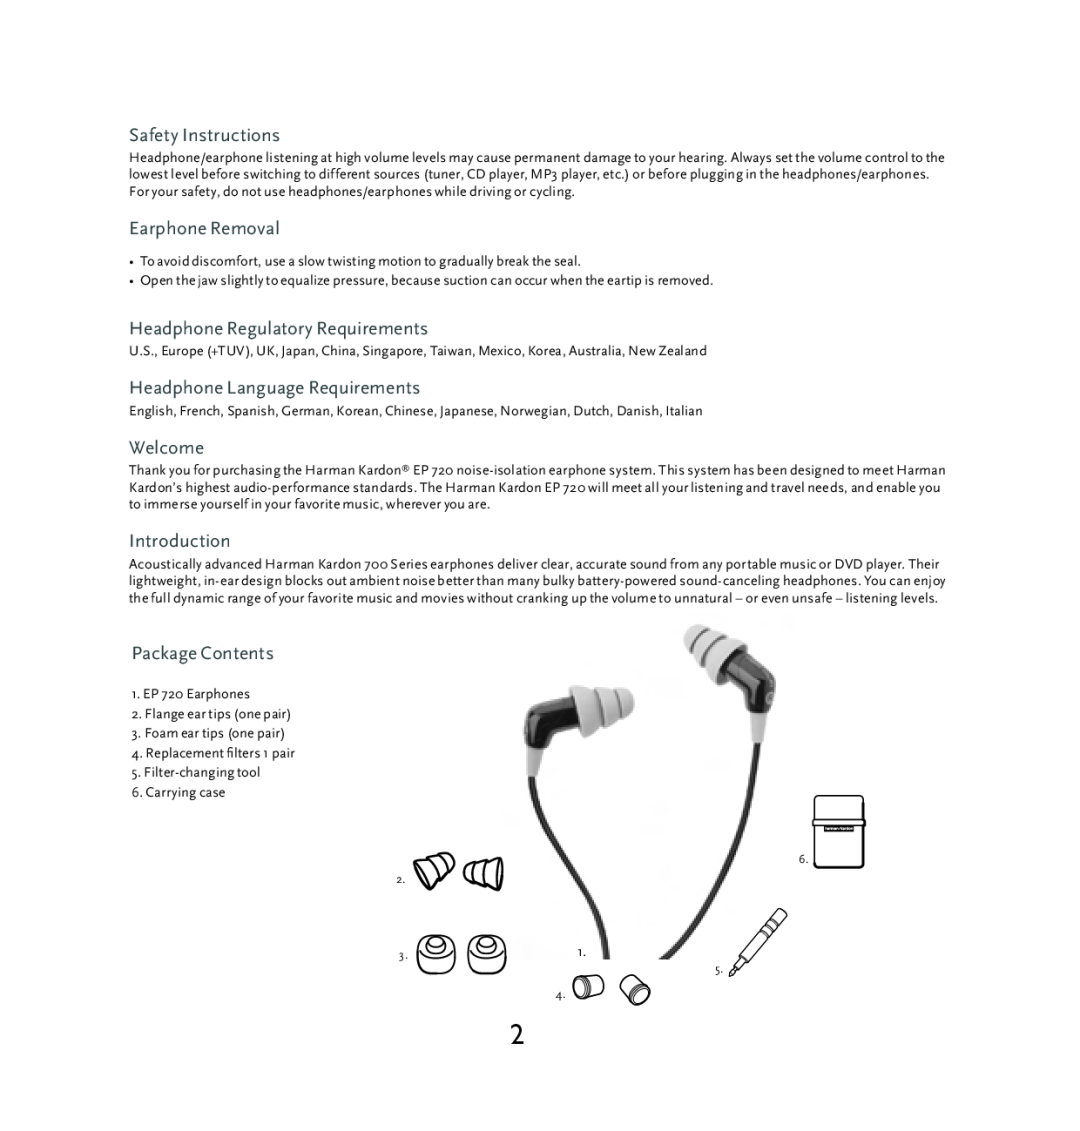 Harman-Kardon ep720 manual Safety Instructions, Earphone Removal, Headphone Regulatory Requirements, Welcome, Introduction 